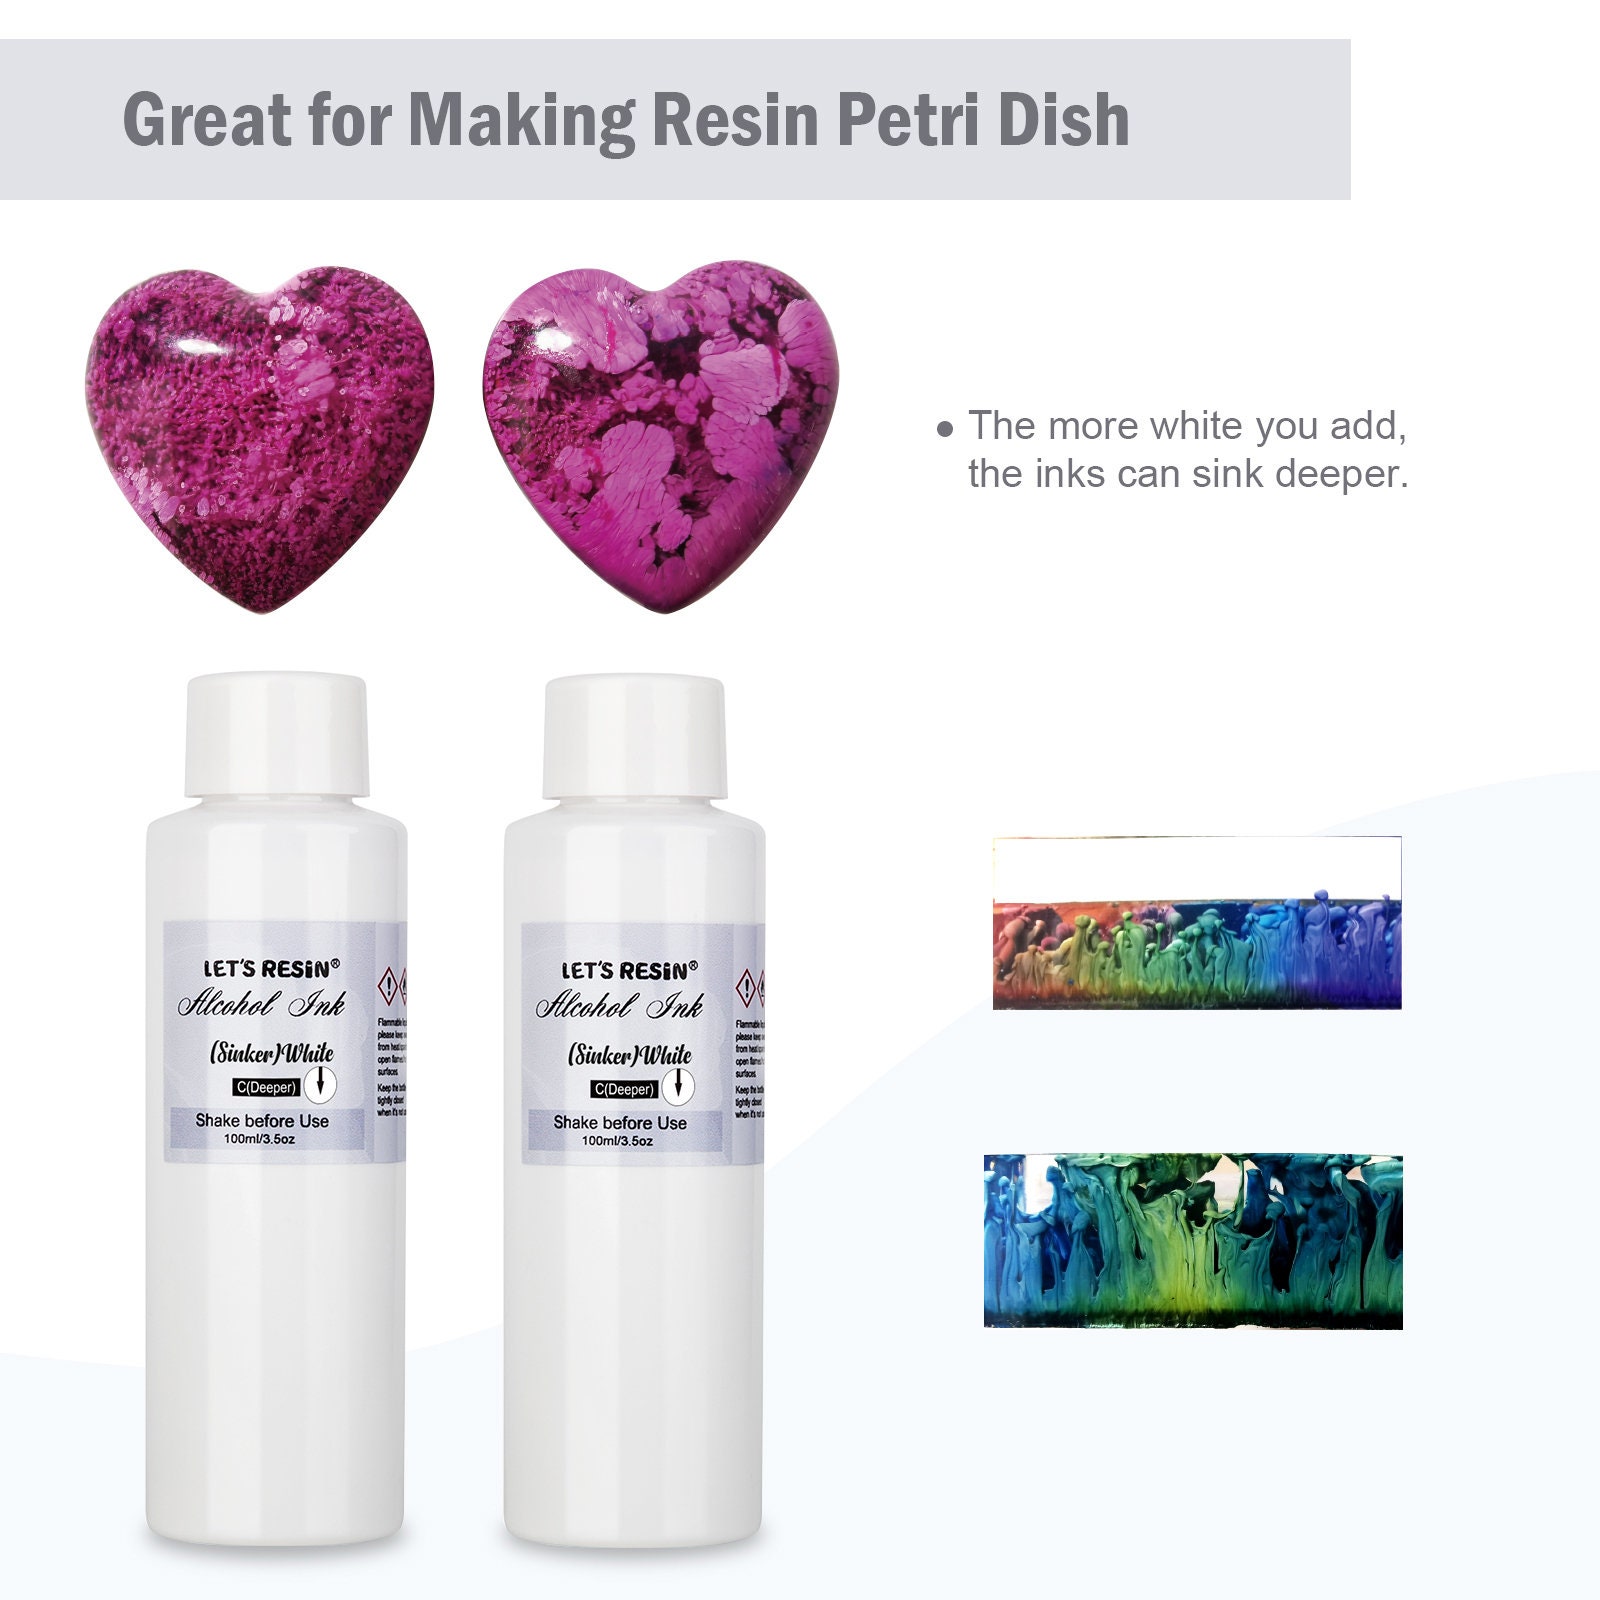 24 Bottle Colors Alcohol-Based Ink Diffusion Epoxy Resin Color Dye